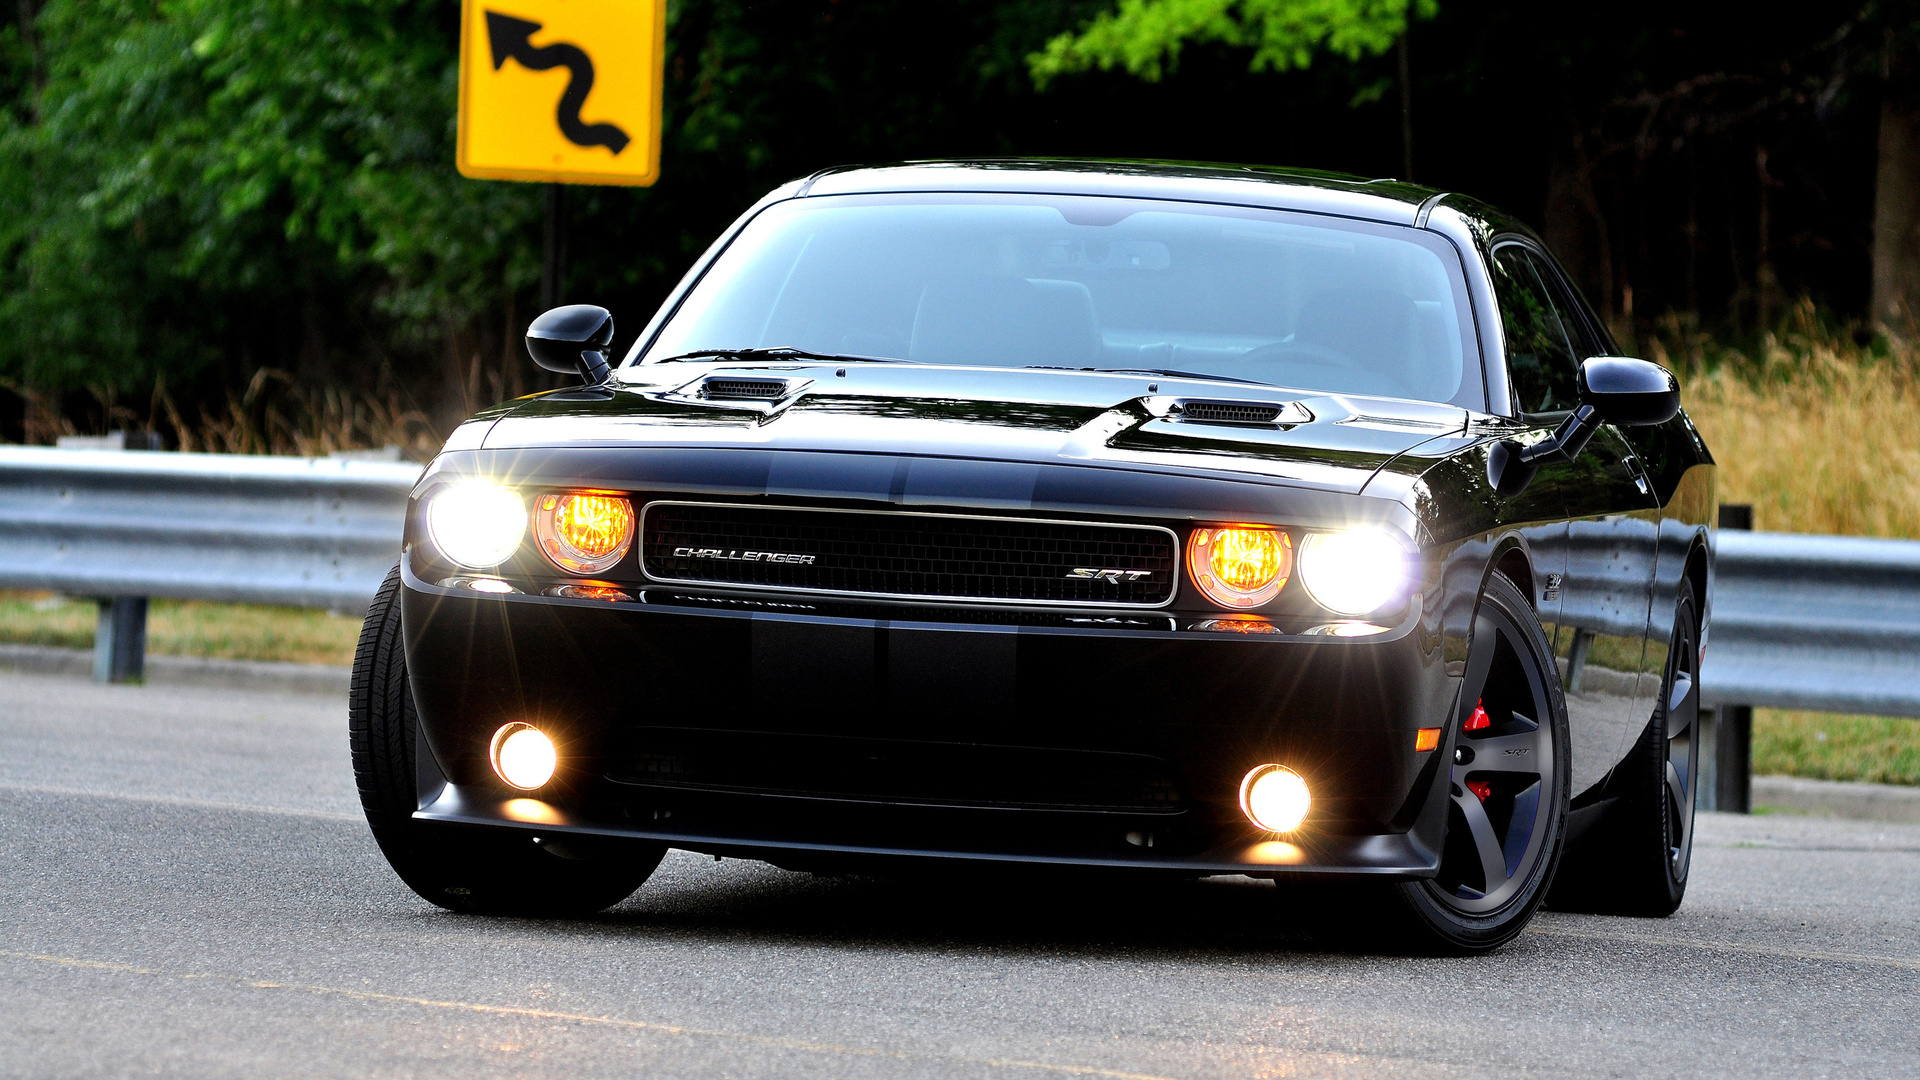 dodge, Challenger, Srt8, Sergio, Marchionne, Tuning, Muscle, Cars Wallpaper